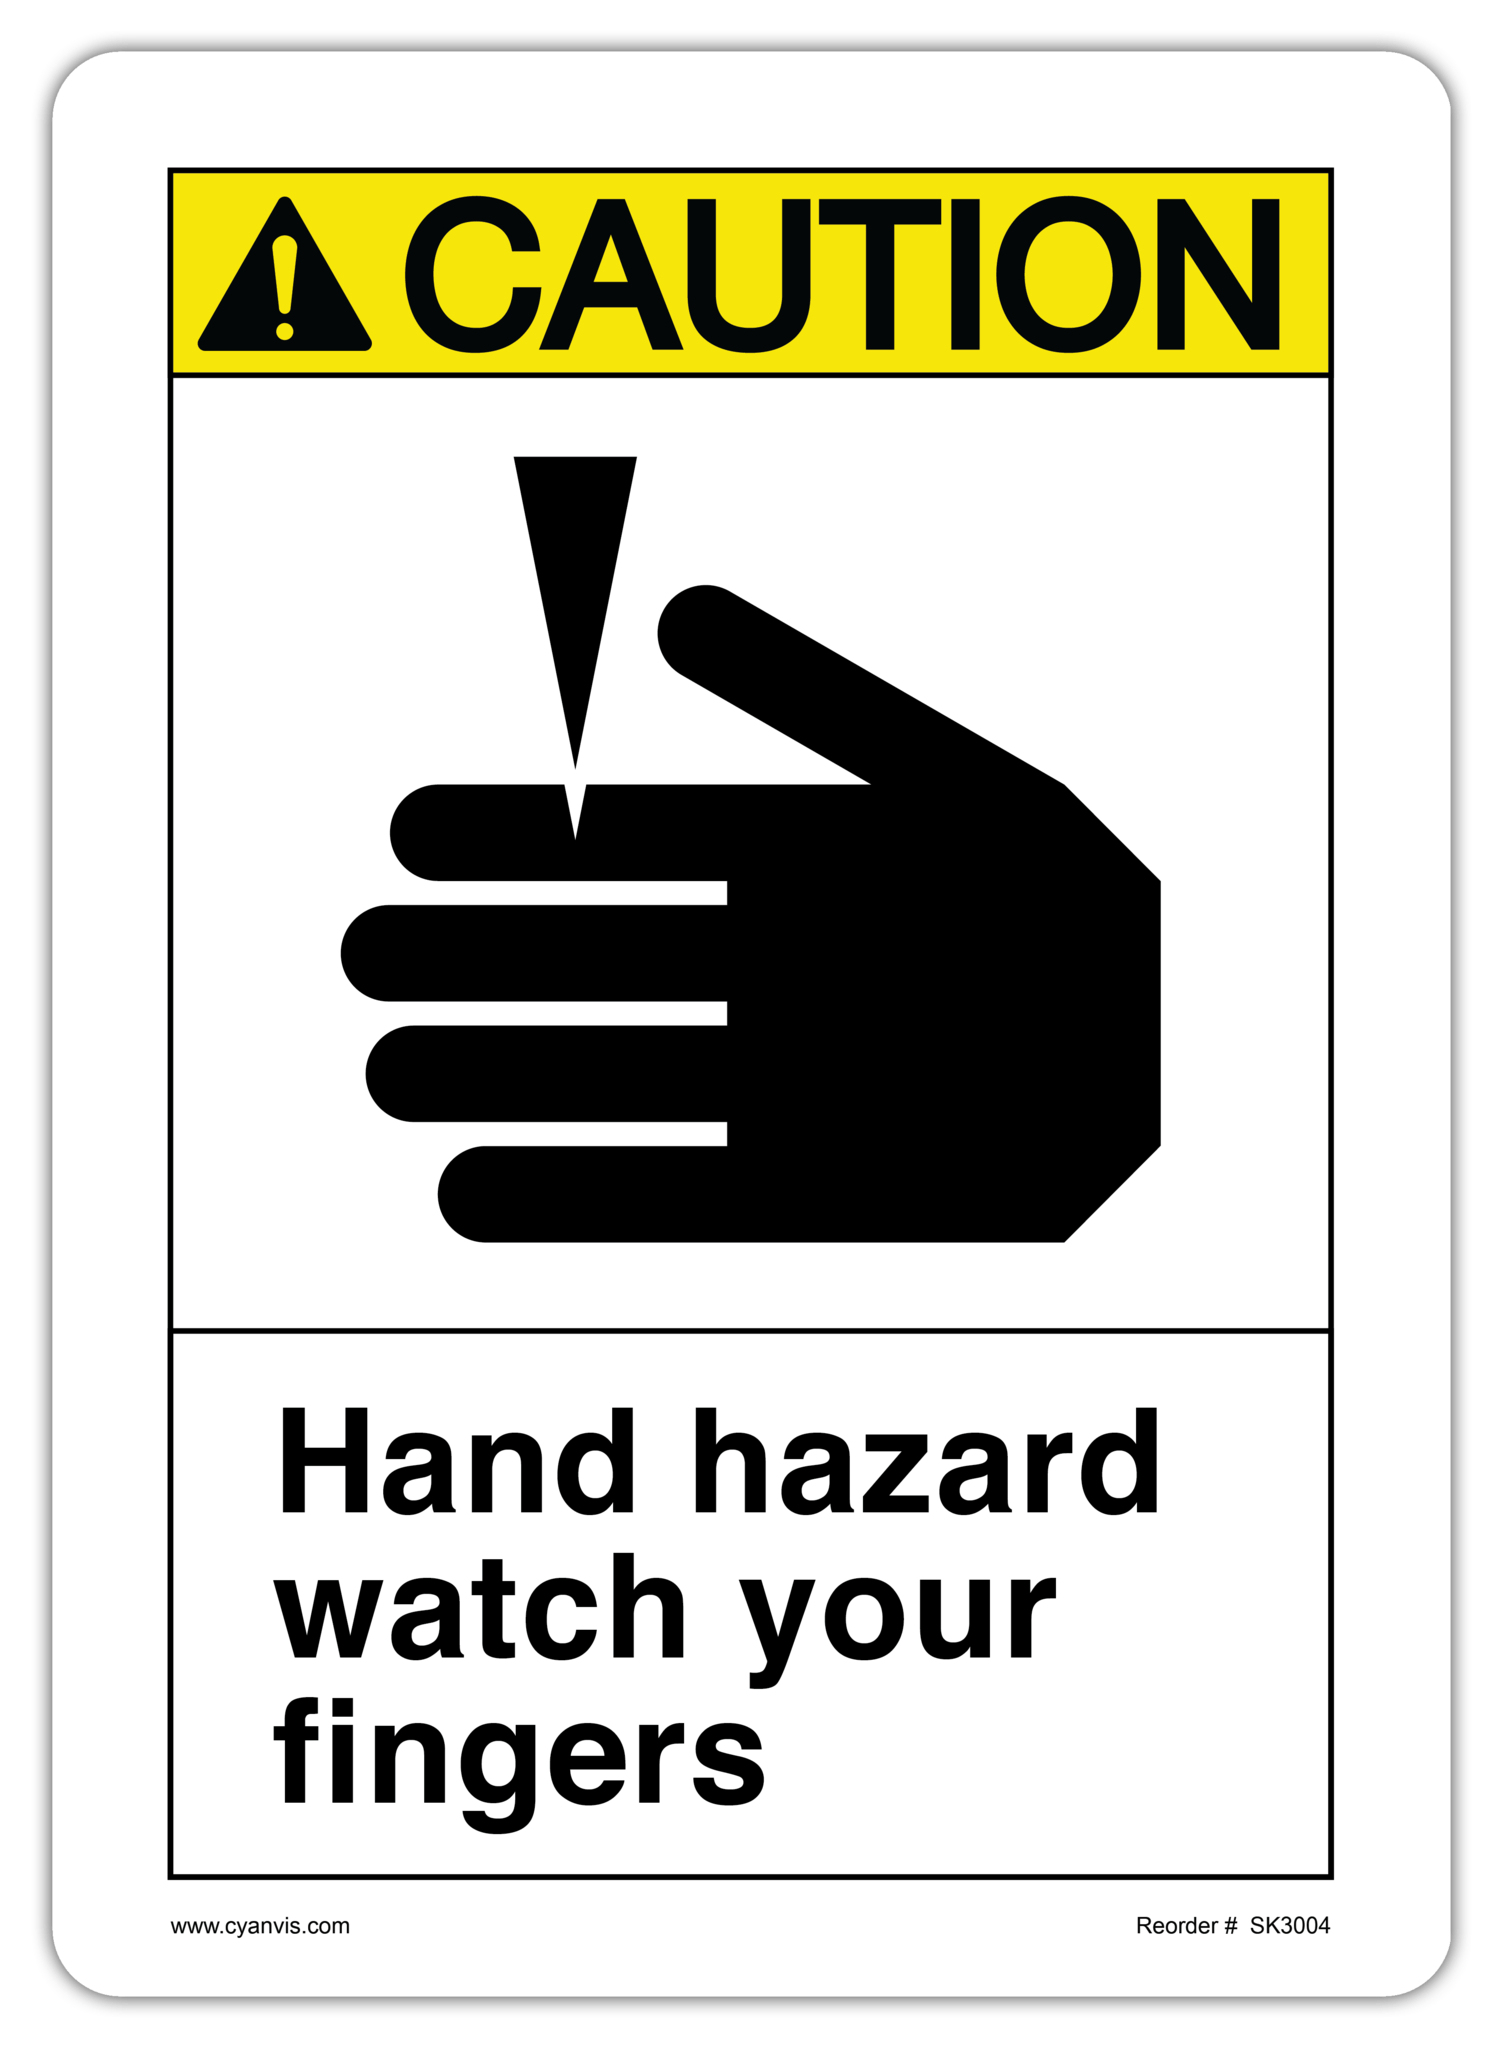 Safety Sign: ASNI - Caution - HAND HAZARD WATCH YOUR FINGERS - CYANvisuals